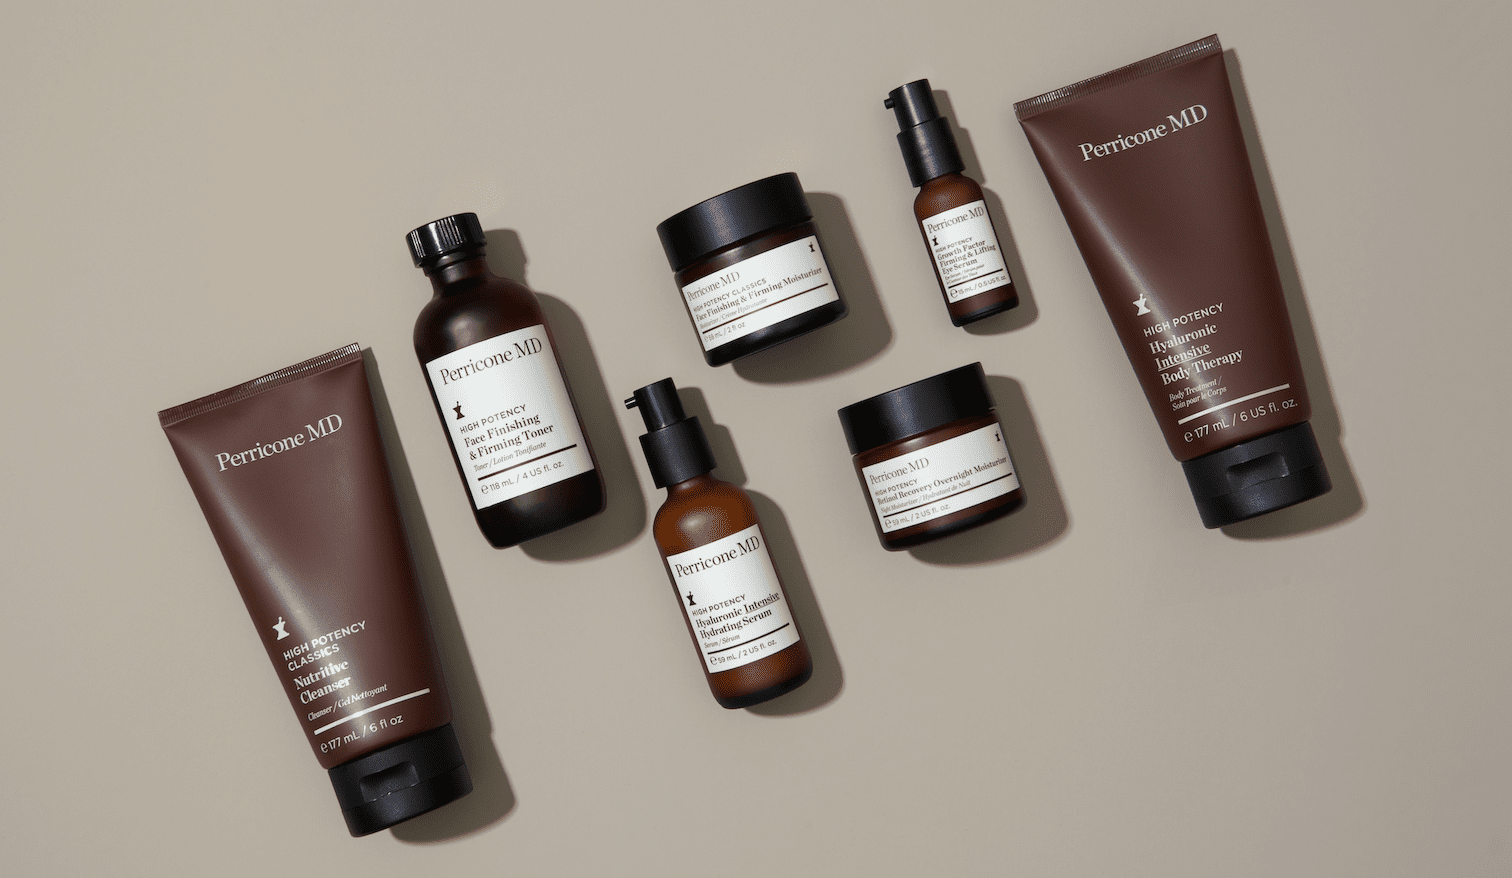 Introducing High Potency Skincare: The Science-Backed Collection to More Even, Smoother Skin